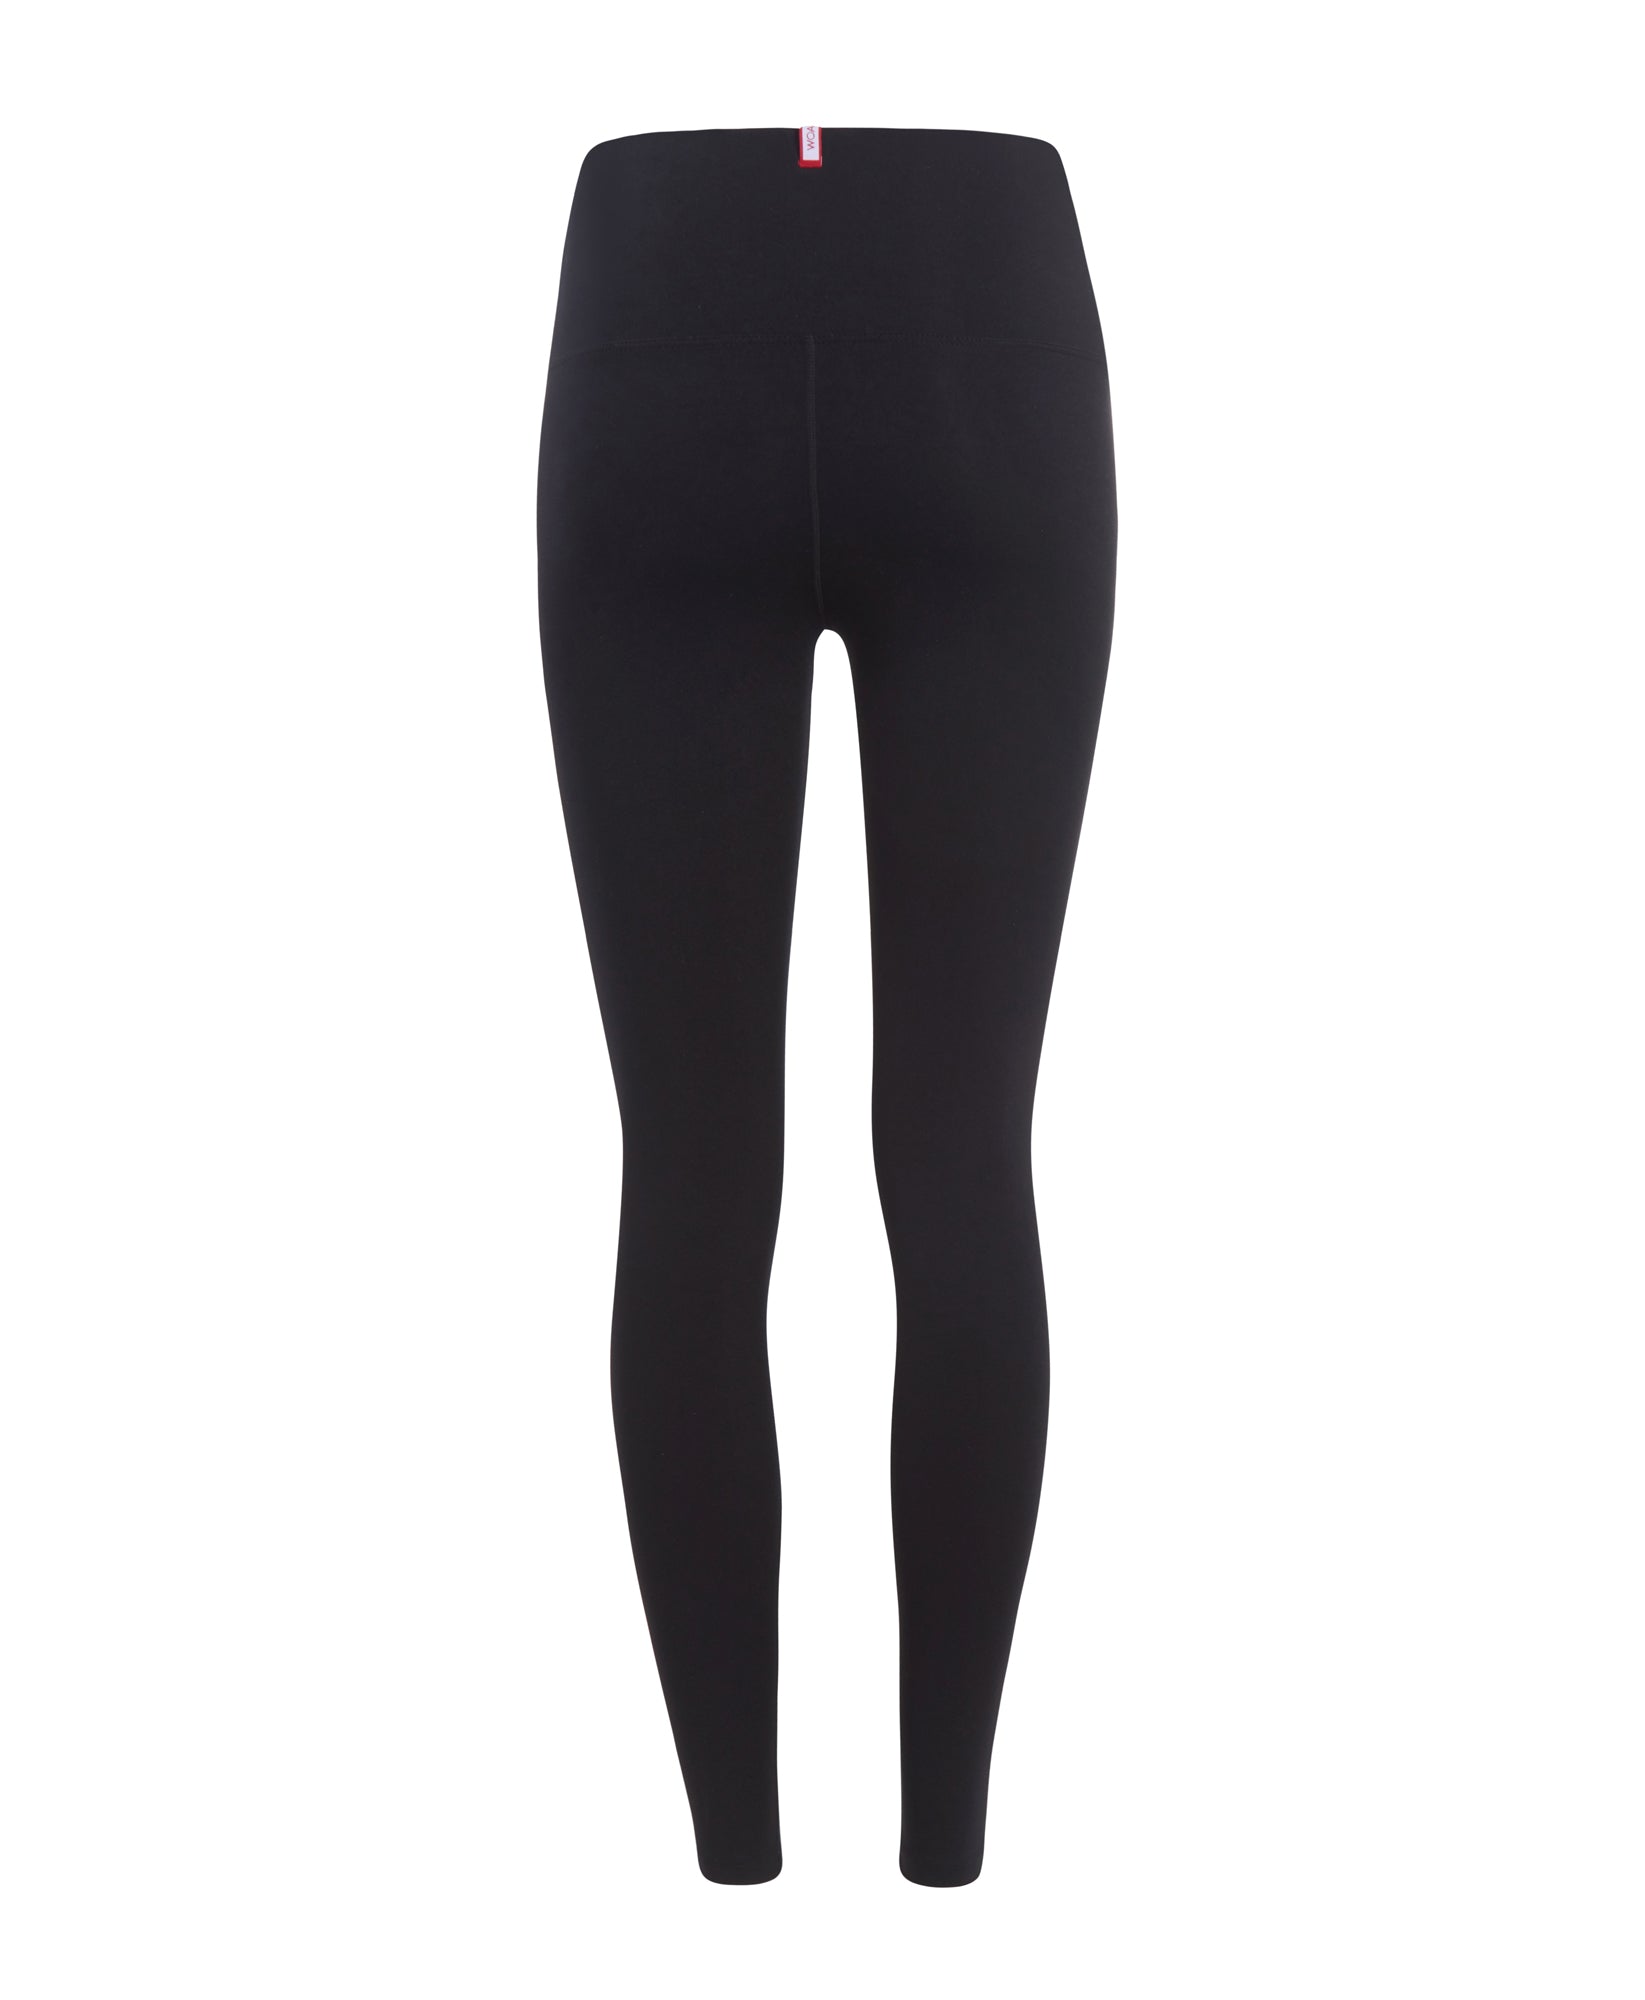 Wear One's At Routine Legging in Bean on Ghost Mannequin Back